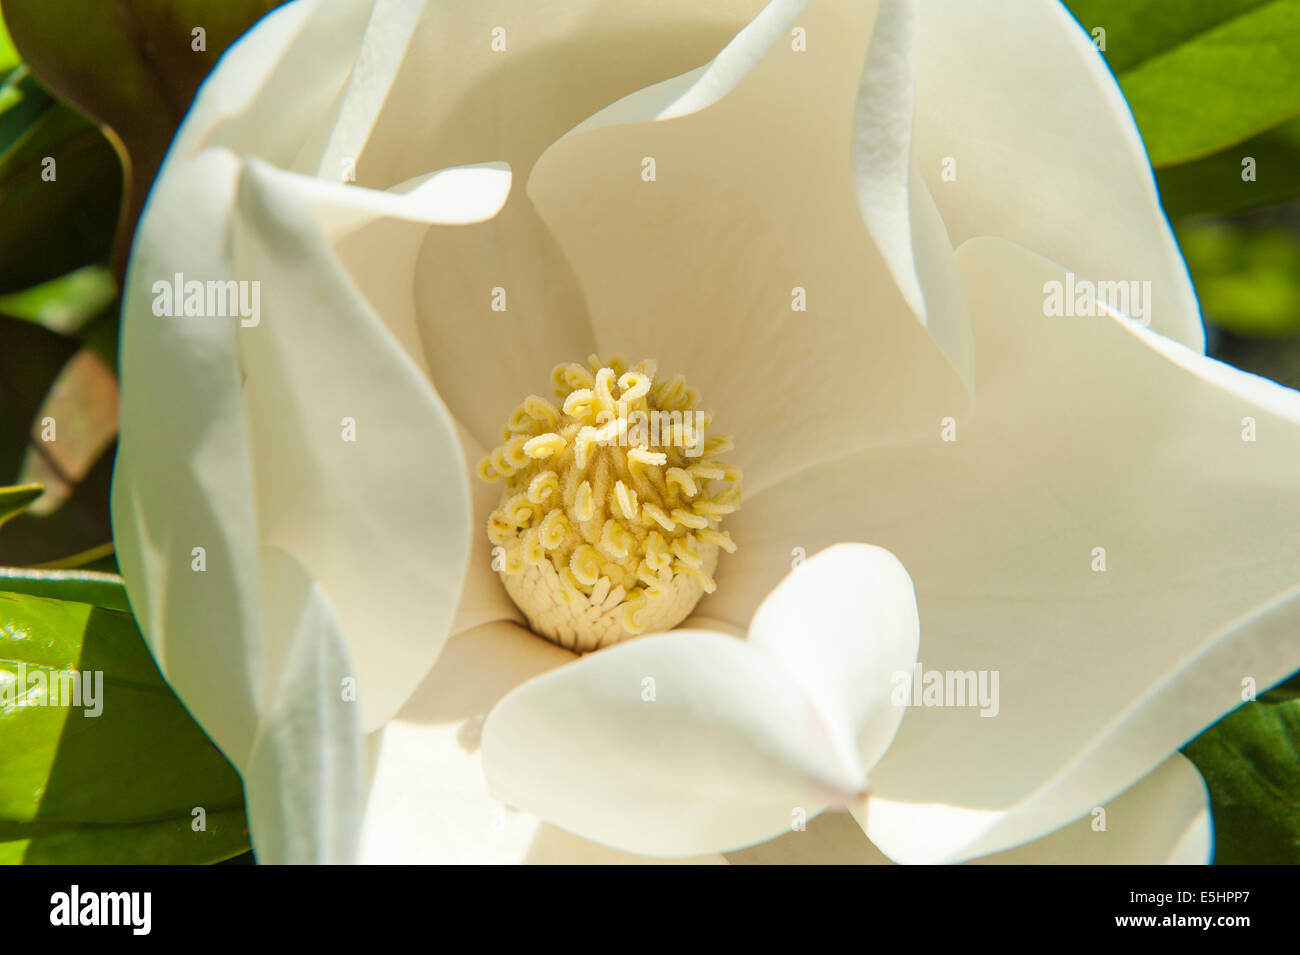 Closeup detail of white flower with stamen Stock Photo